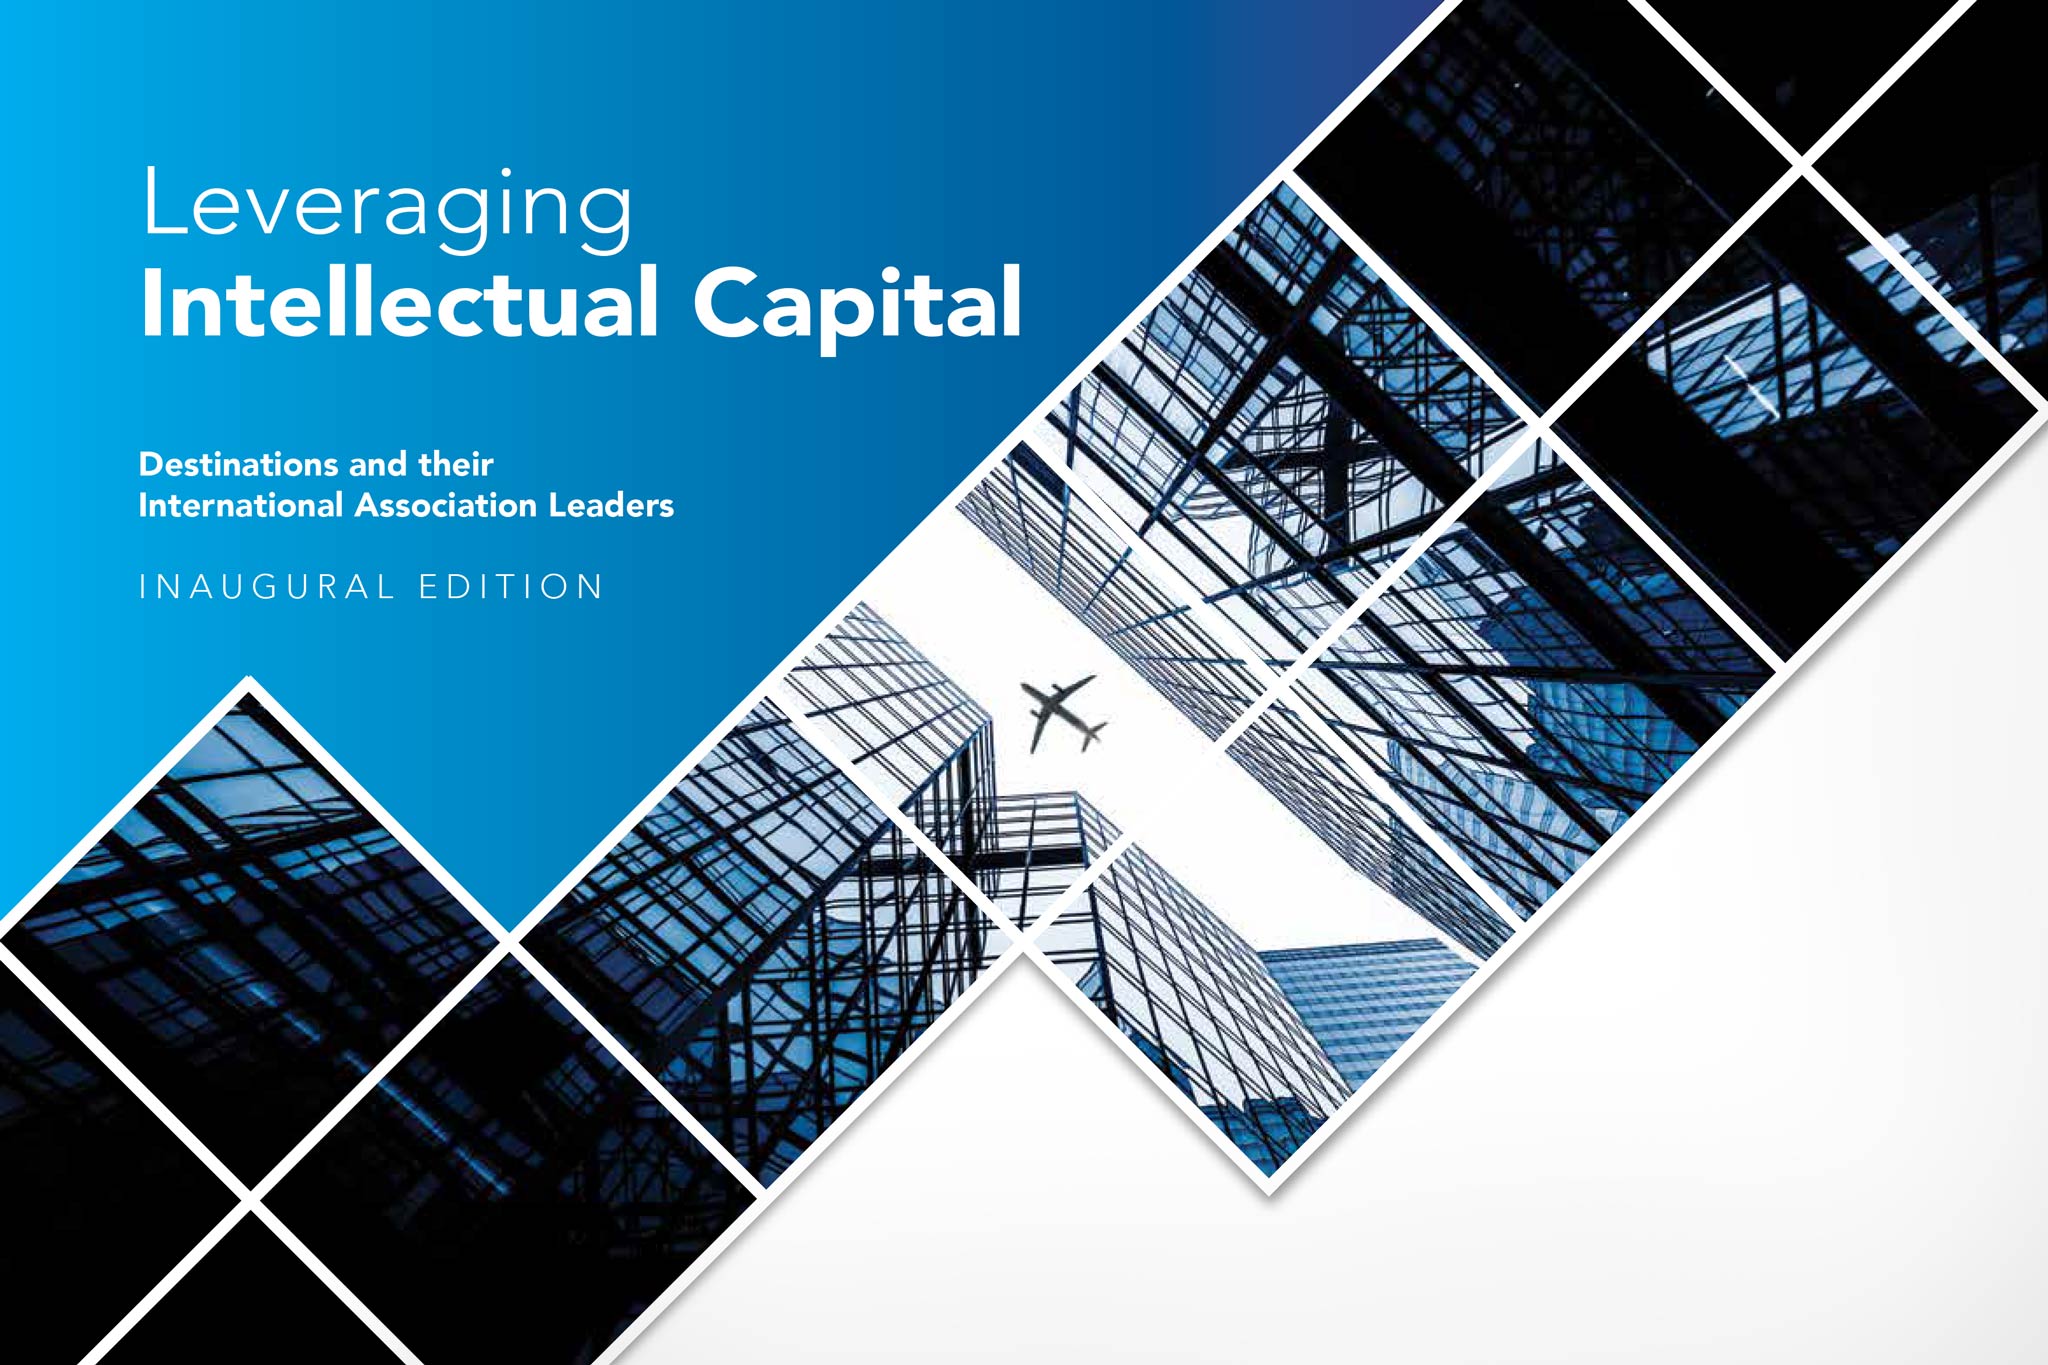 Gaining Edge “Leveraging Intellectual Capital” inaugural edition, front cover image.